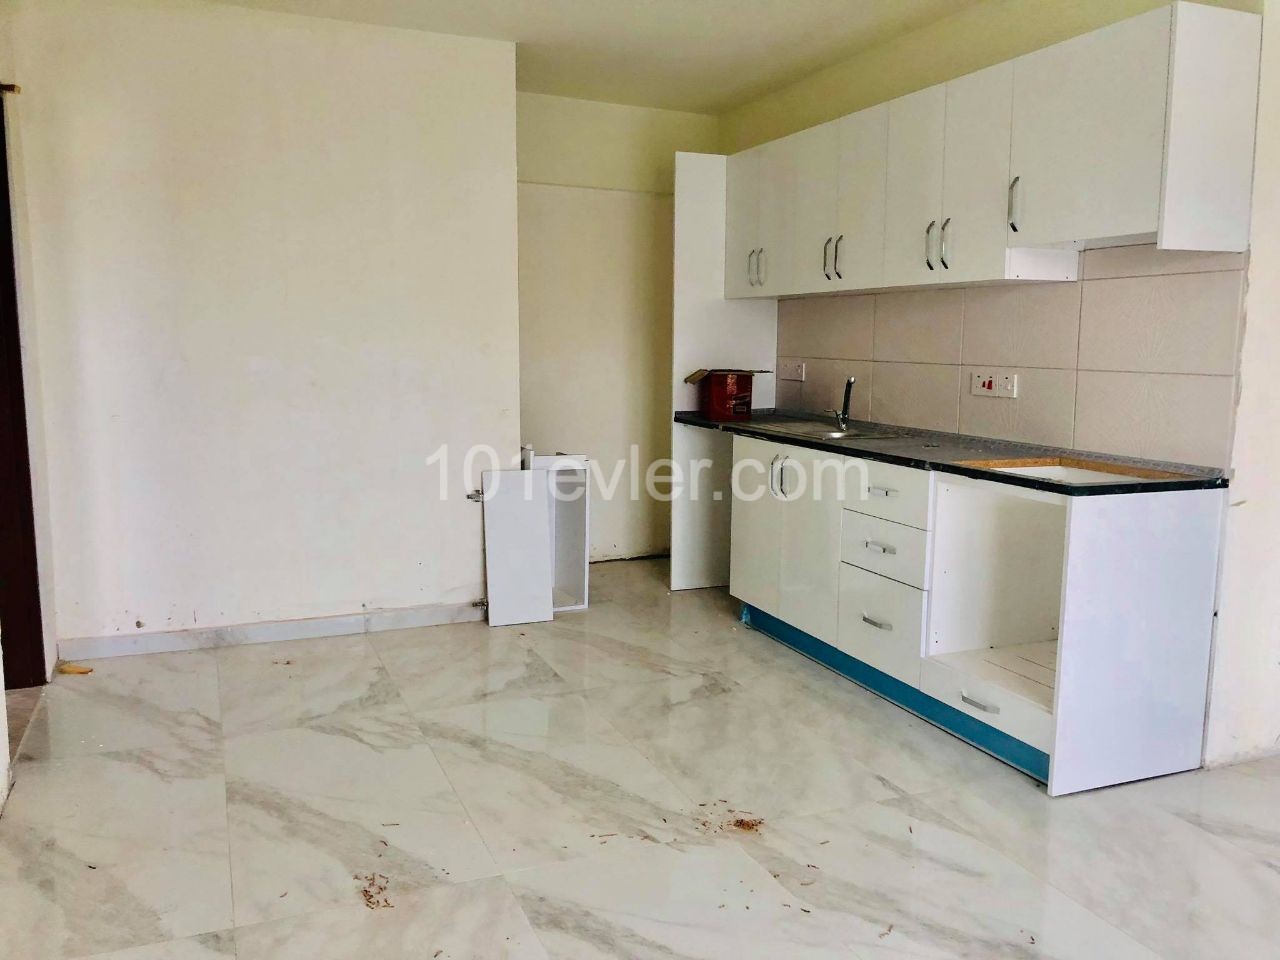 2 +1 ZERO APARTMENTS FOR SALE IN FAMAGUSTA ** 